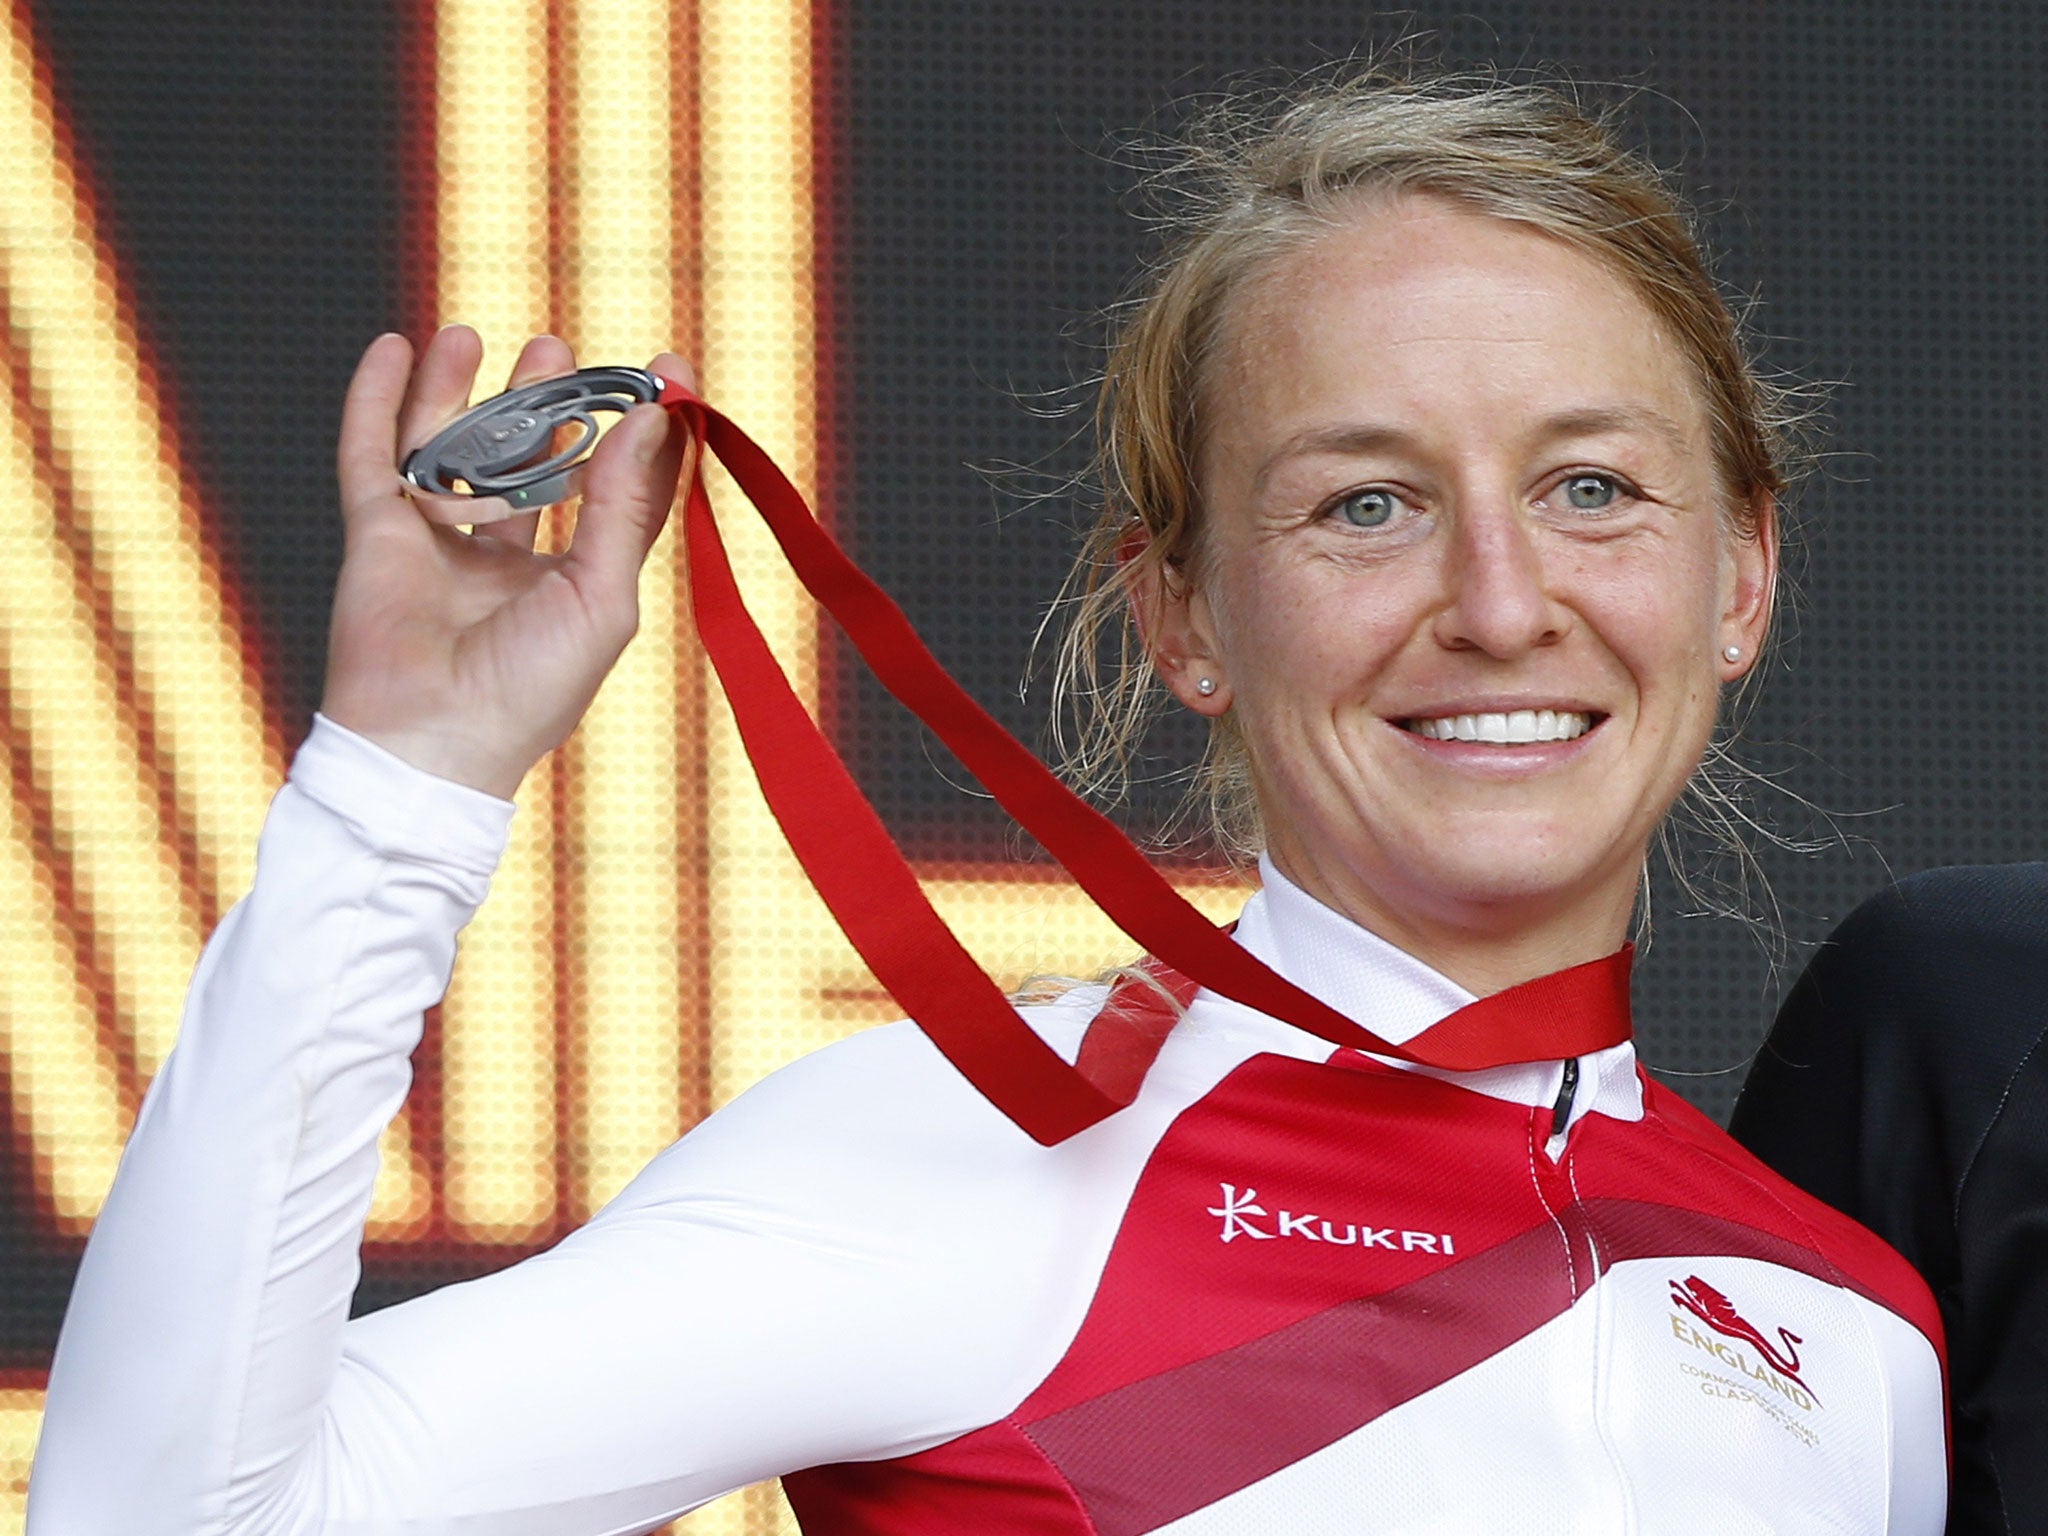 England's Emma Pooley won silver in the women's time trial